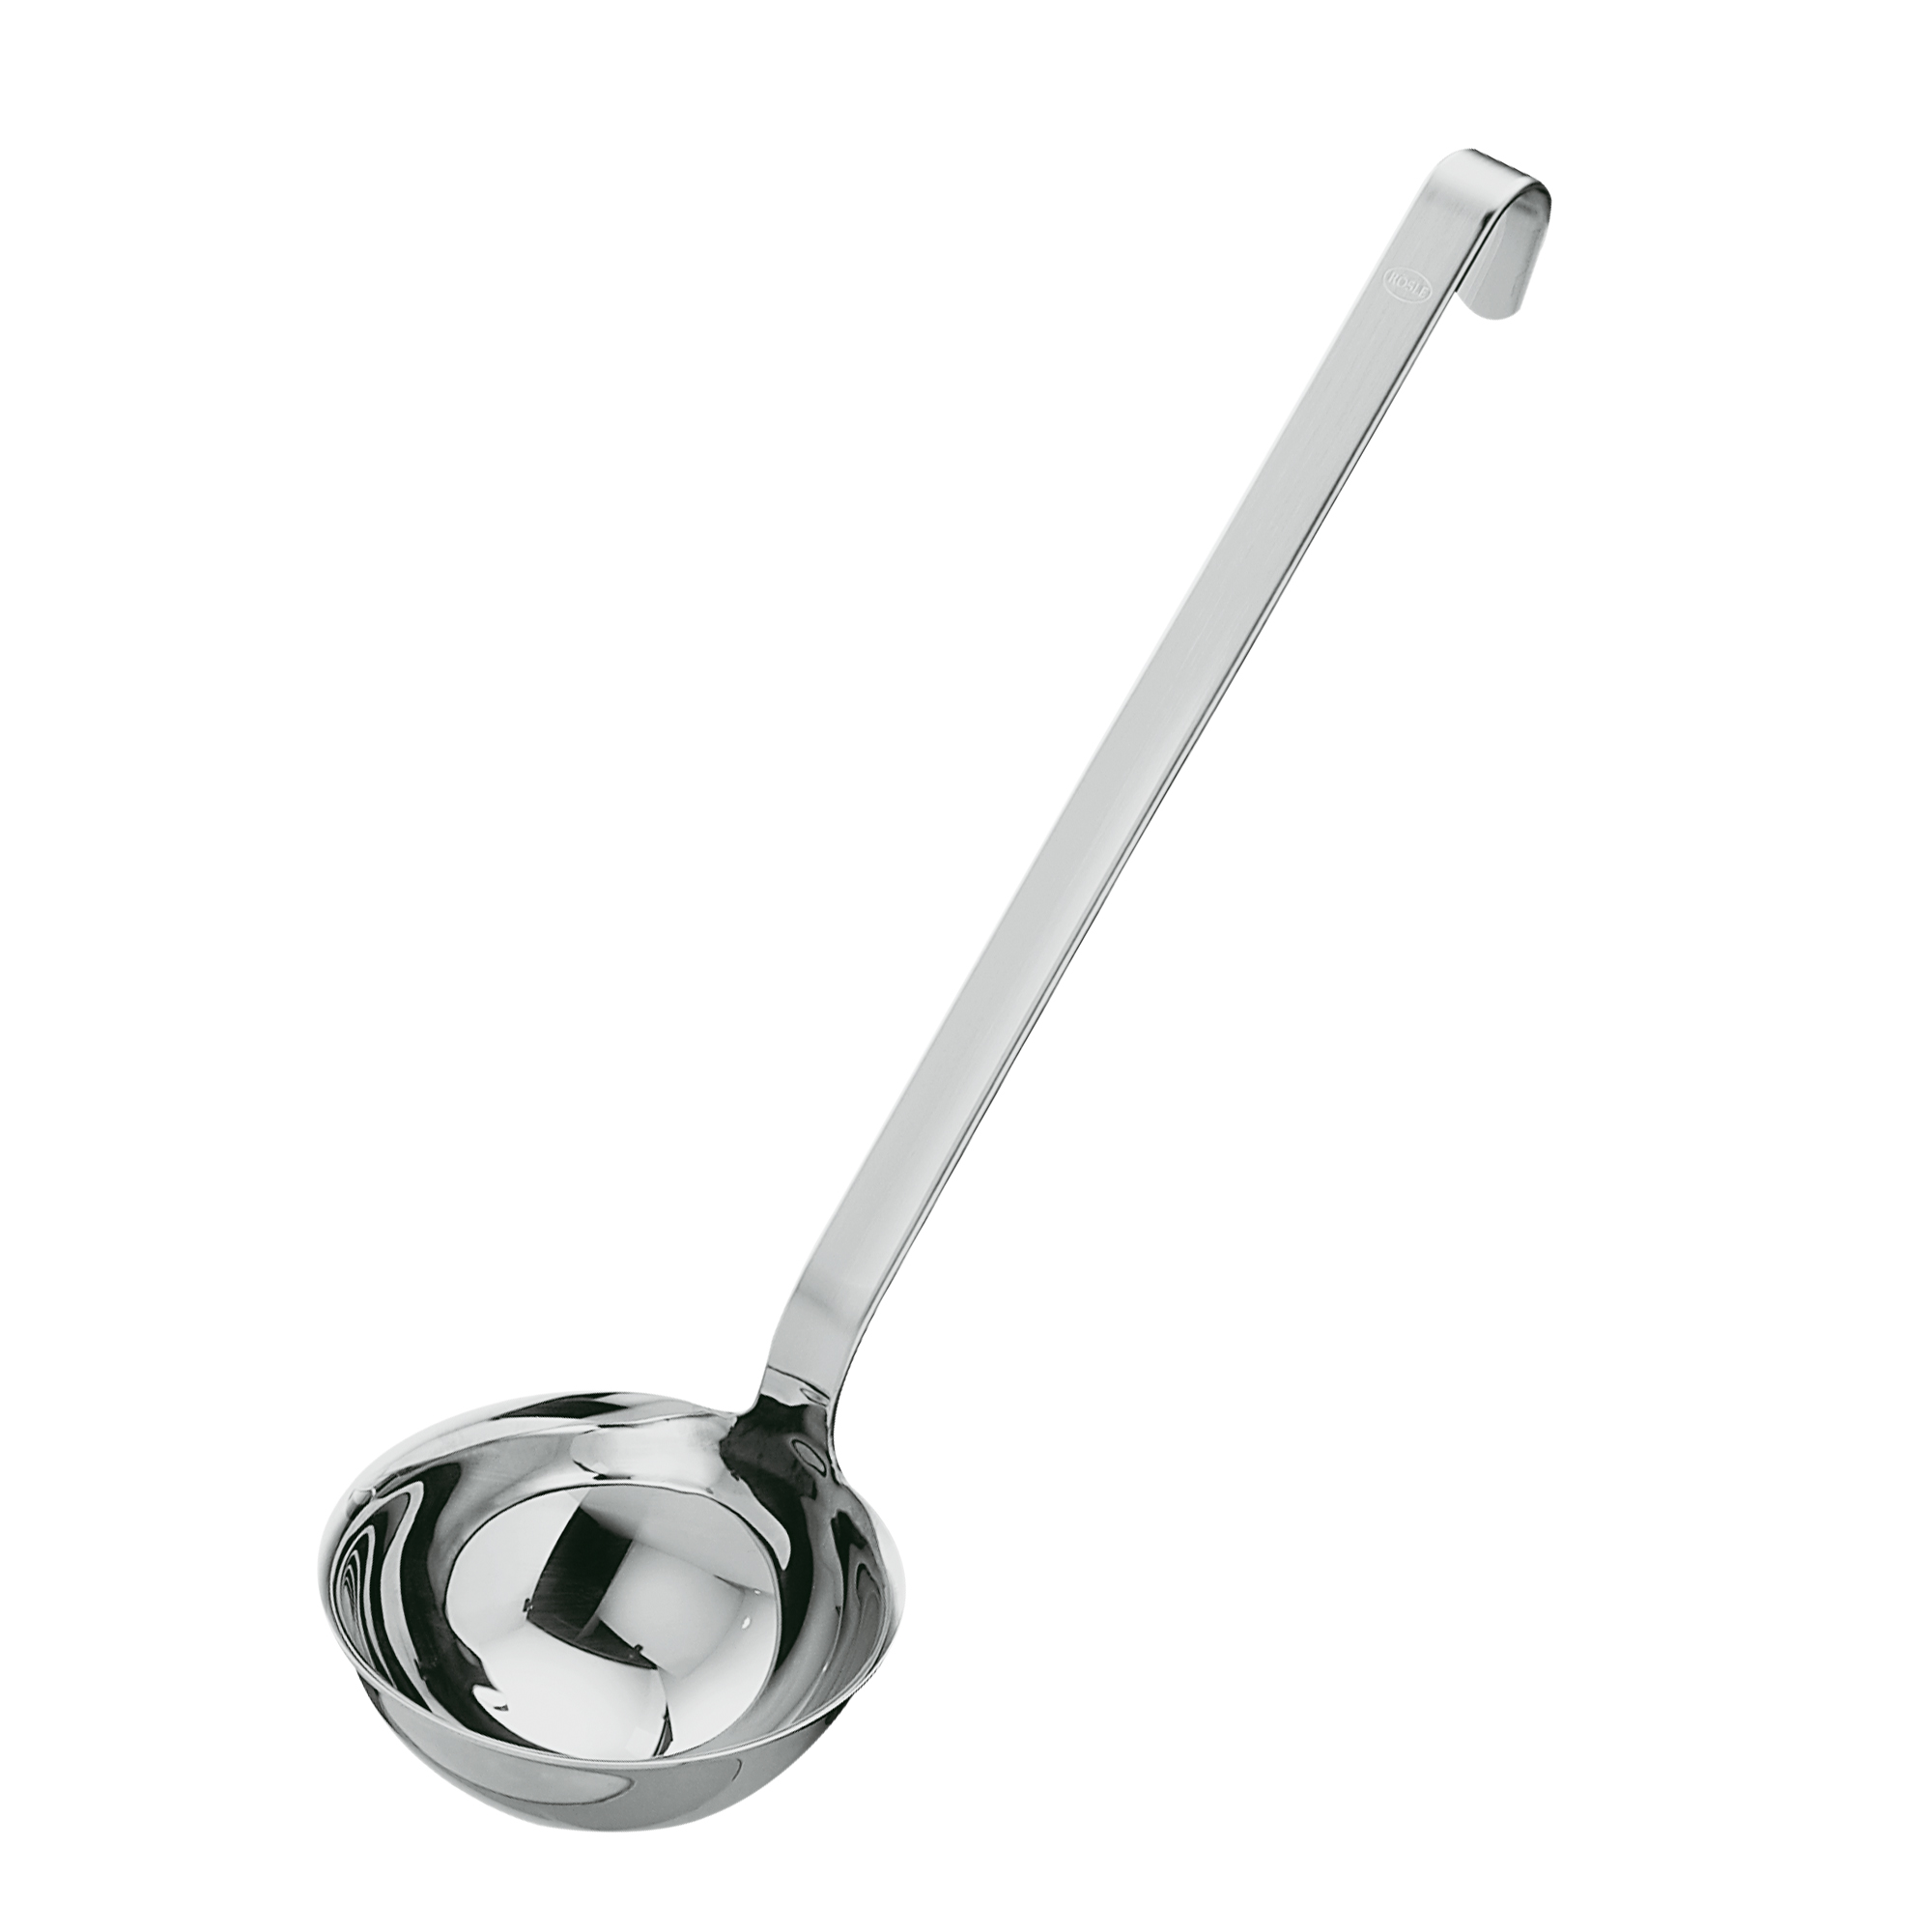 Hook Ladle with pouring rim Ø 9 cm|3.5 in.